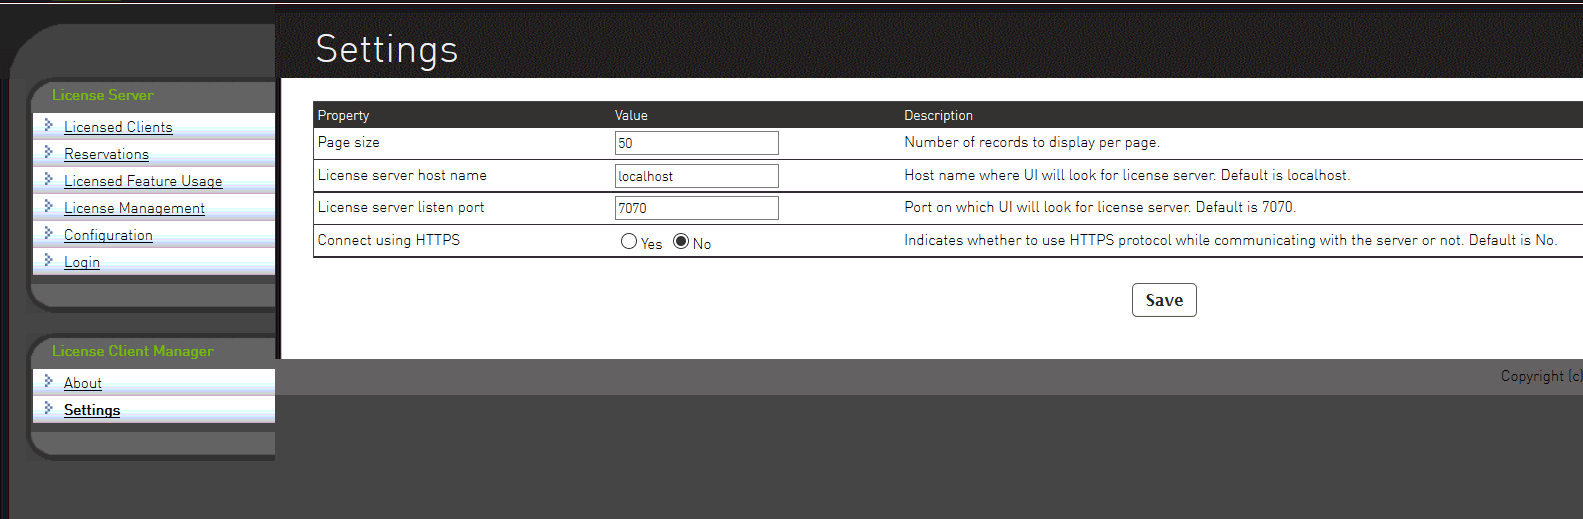 Screen capture of the Settings page showing settings for connecting to the license server over HTTPS.